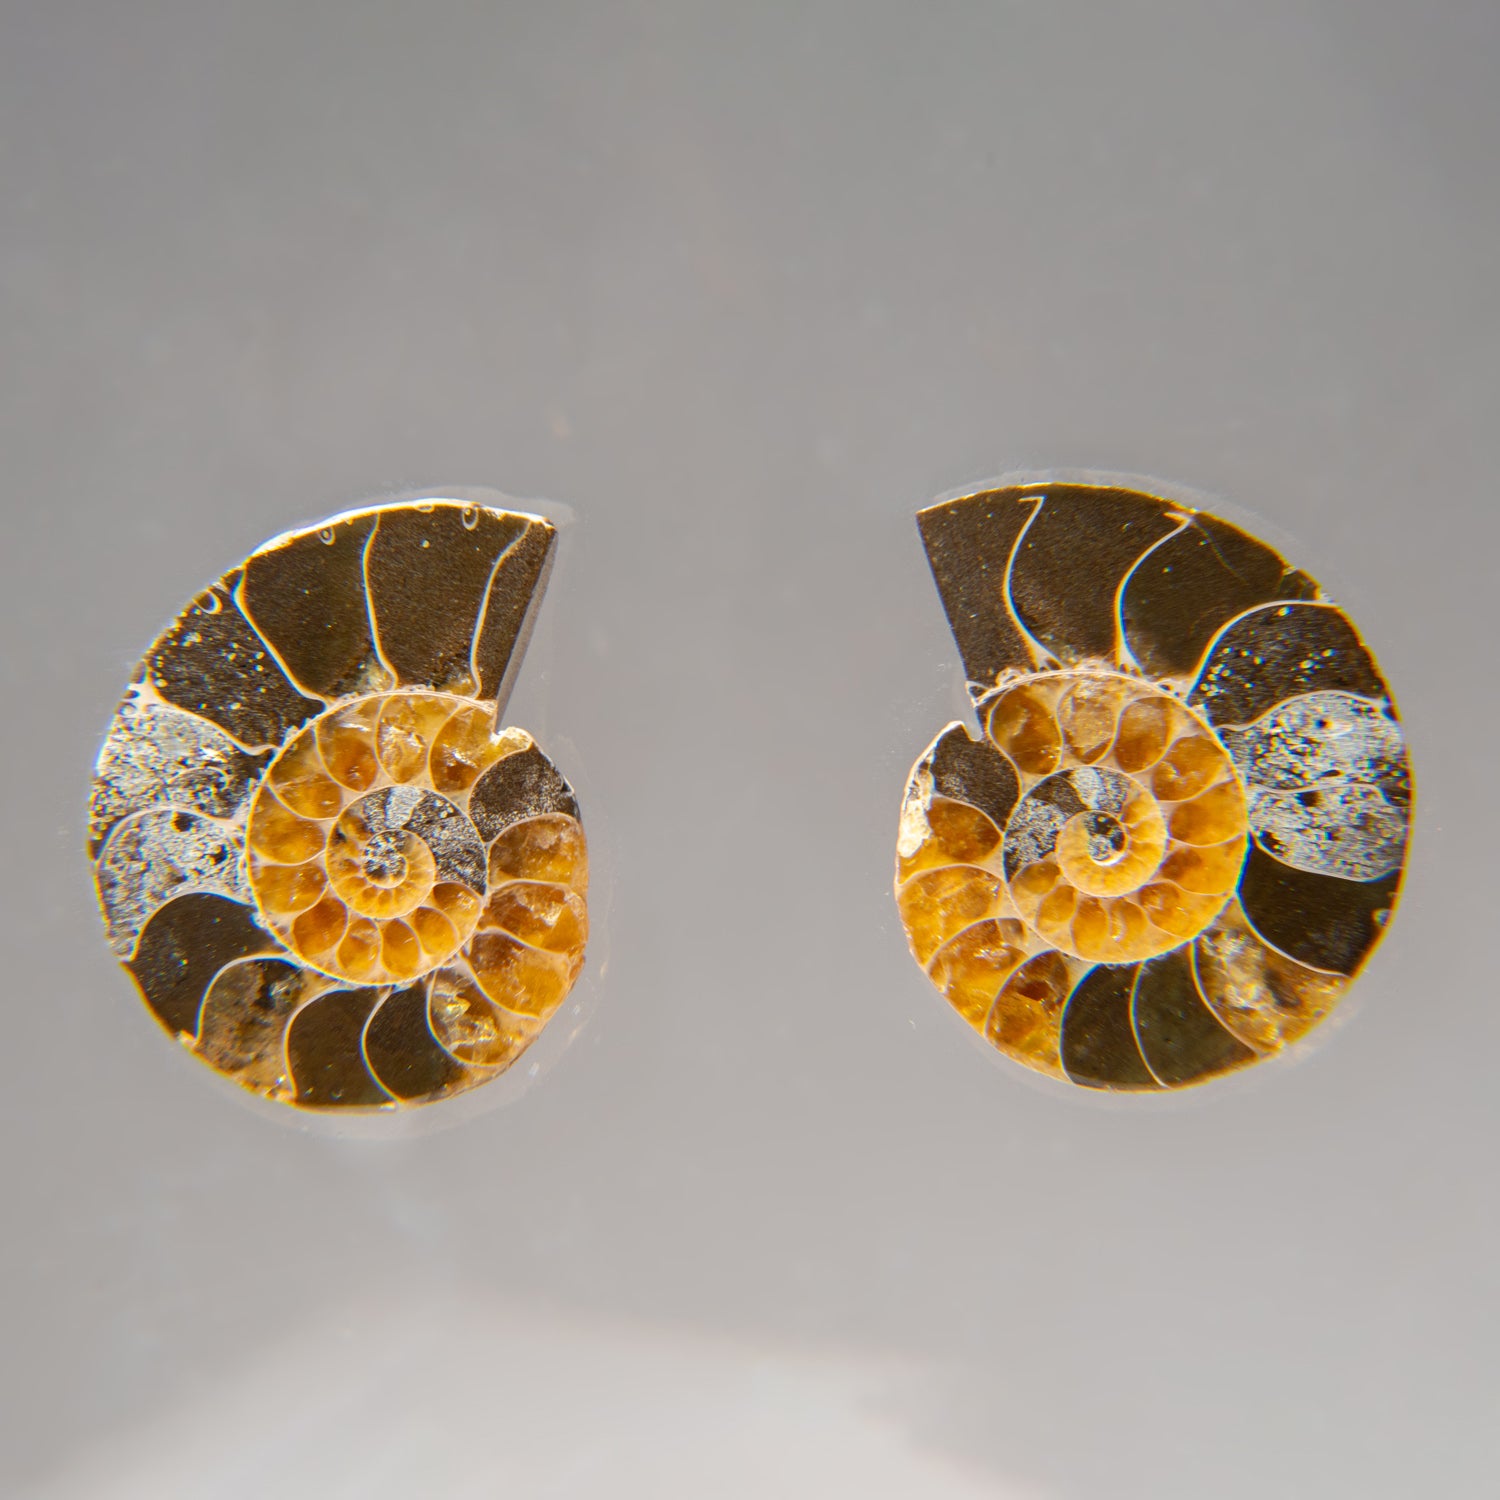 Two Genuine Polished Calcified Ammonite Halves in display box (15 grams)